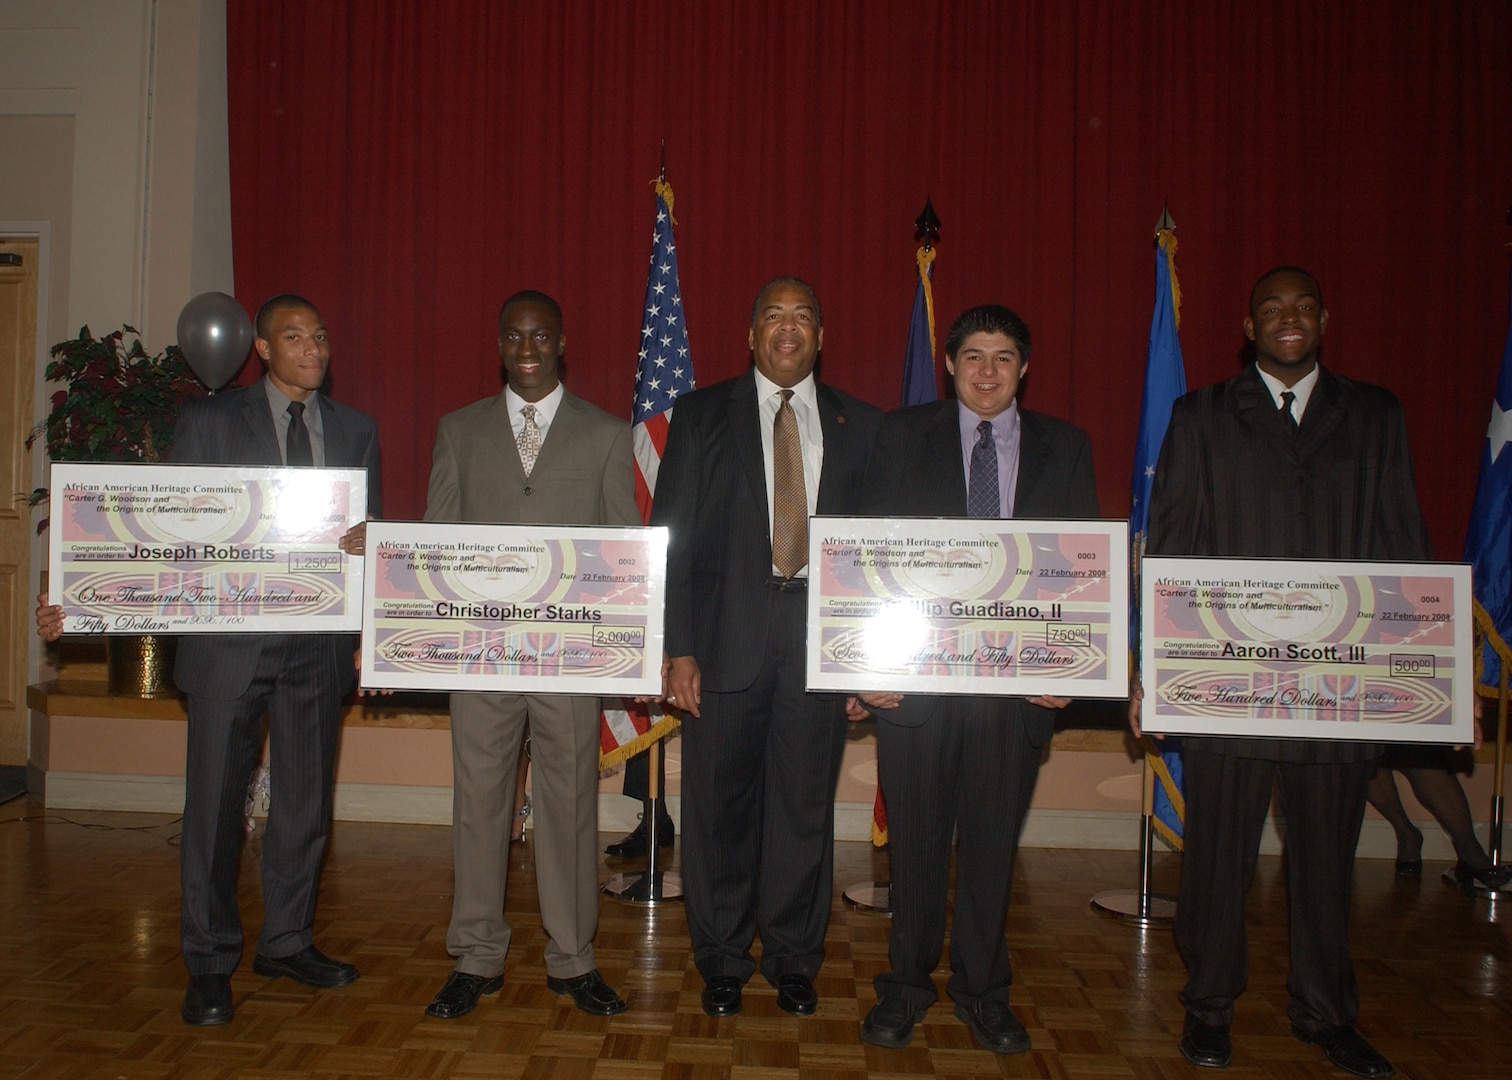 Recipients of the African American Heritage Committee scholarships pictured with retired Lt. Gen. John Hopper, the guest speaker for the AAHC Scholarship Banquet on Feb. 22, are (from left) Joseph S. Roberts, Christopher E. Starks, Phillip Guadiano II and Aaron Scott III. Mr. Roberts of John Marshall H.S. was the 2nd place winner and received a $1,250 scholarship award. He plans to attend Houston Baptist University. Mr. Starks of Earl Warren H.S. was the 1st place winner and received a $2,000 scholarship award. He plans to attend Texas A&M University. Mr.Guadiano of Sandra Day O'Conner H.S. was the 3rd place winner and received a $750 scholarship award. He plans to attend Texas A&M University. Mr. Scott of John Jay Science and Engineering Academy was the 4th place winner and received a $500 scholarship award. He plans to attend University of Texas-San Antonio. (USAF photo by Alan Boedeker)                              